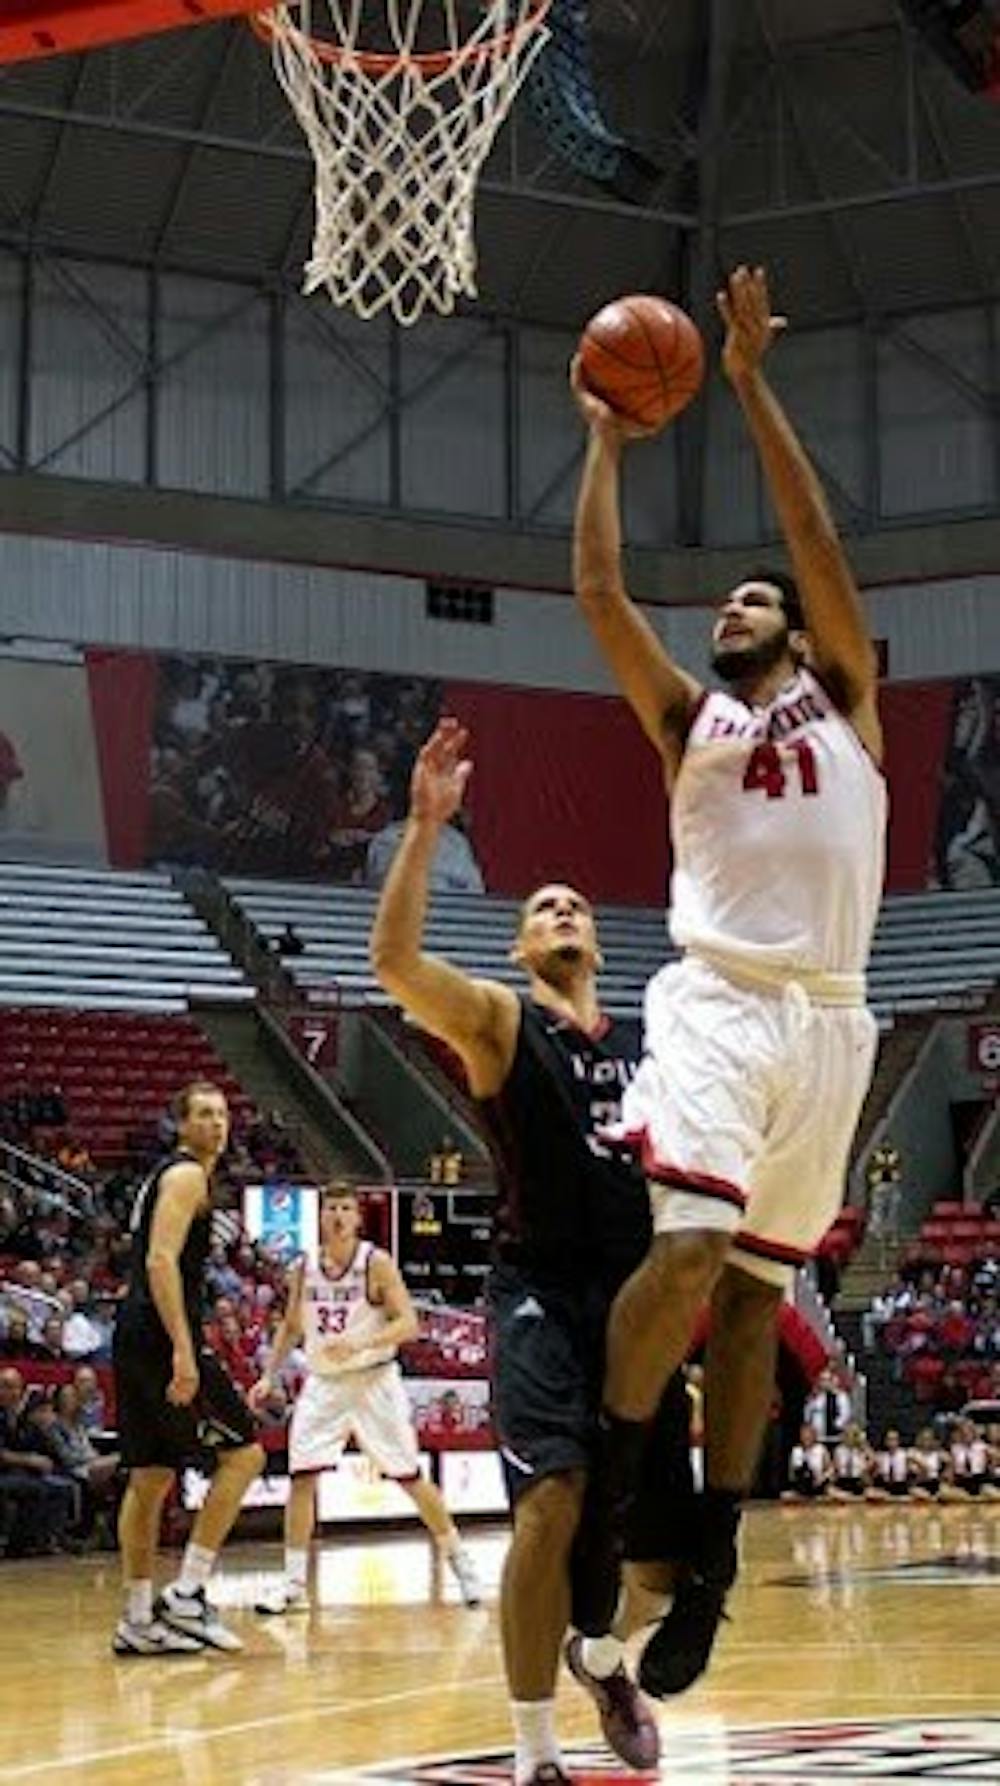 <p>Trey Moses, a freshman forward center for the Ball State Cardinals, attempts to score a layup during the game against IUPUI on Dec. 1 in John E.&nbsp;Worthen Arena. <em>Grace Ramey // DN File</em></p>